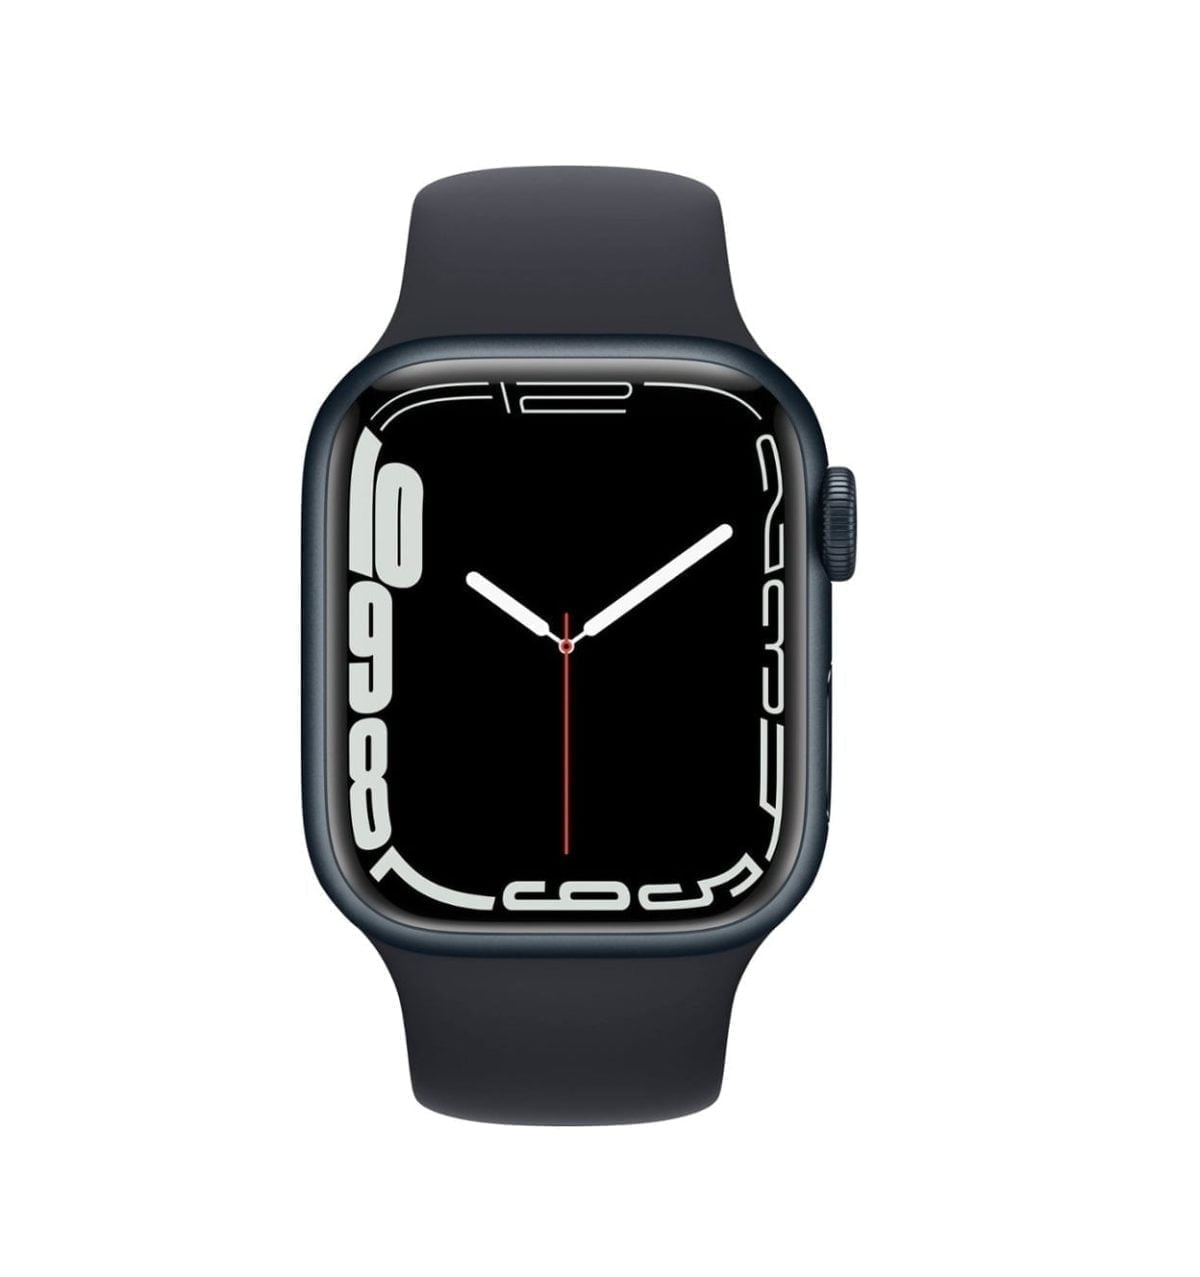 Apple &Lt;H1&Gt;Apple Watch Series 7 (Gps) 41Mm Midnight Aluminum Case With Midnight Sport Band - Midnight&Lt;/H1&Gt; &Lt;H2&Gt;Model : Mkmx3&Lt;/H2&Gt; &Lt;Div Class=&Quot;Long-Description-Container Body-Copy &Quot;&Gt; &Lt;Div Class=&Quot;Html-Fragment&Quot;&Gt; &Lt;Div&Gt; &Lt;Div&Gt;The Largest, Most Advanced Always-On Retina Display Yet Makes Everything You Do With Your Apple Watch Series 7 Bigger And Better. Series 7 Is The Most Durable Apple Watch Ever Built, With An Even More Crack-Resistant Front Crystal. Advanced Features Let You Measure Your Blood Oxygen Level,¹ Take An Ecg Anytime,² And Access Mindfulness And Sleep Tracking Apps. You Can Also Track Dozens Of Workouts, Including New Tai Chi And Pilates.&Lt;/Div&Gt; &Lt;/Div&Gt; &Lt;/Div&Gt; &Lt;/Div&Gt; Apple Watch Series Apple Watch Series 7 (Gps) 41Mm - Midnight